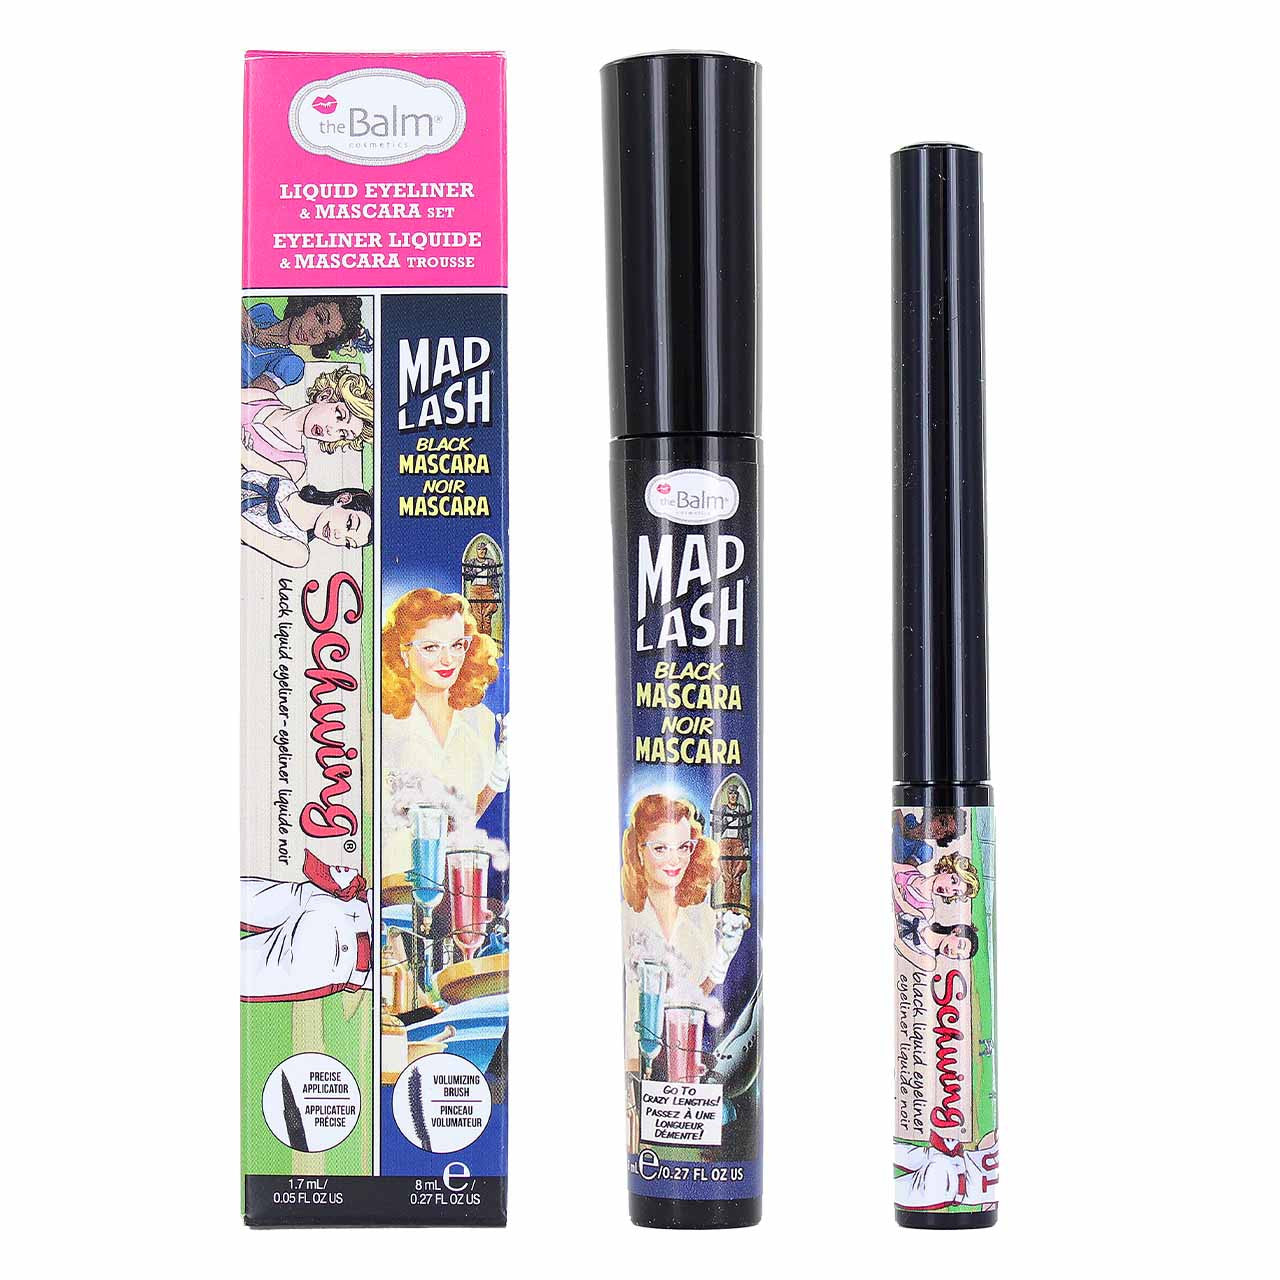 The Balm  MASCARA And LINER Schwing and Mad Lash Kit